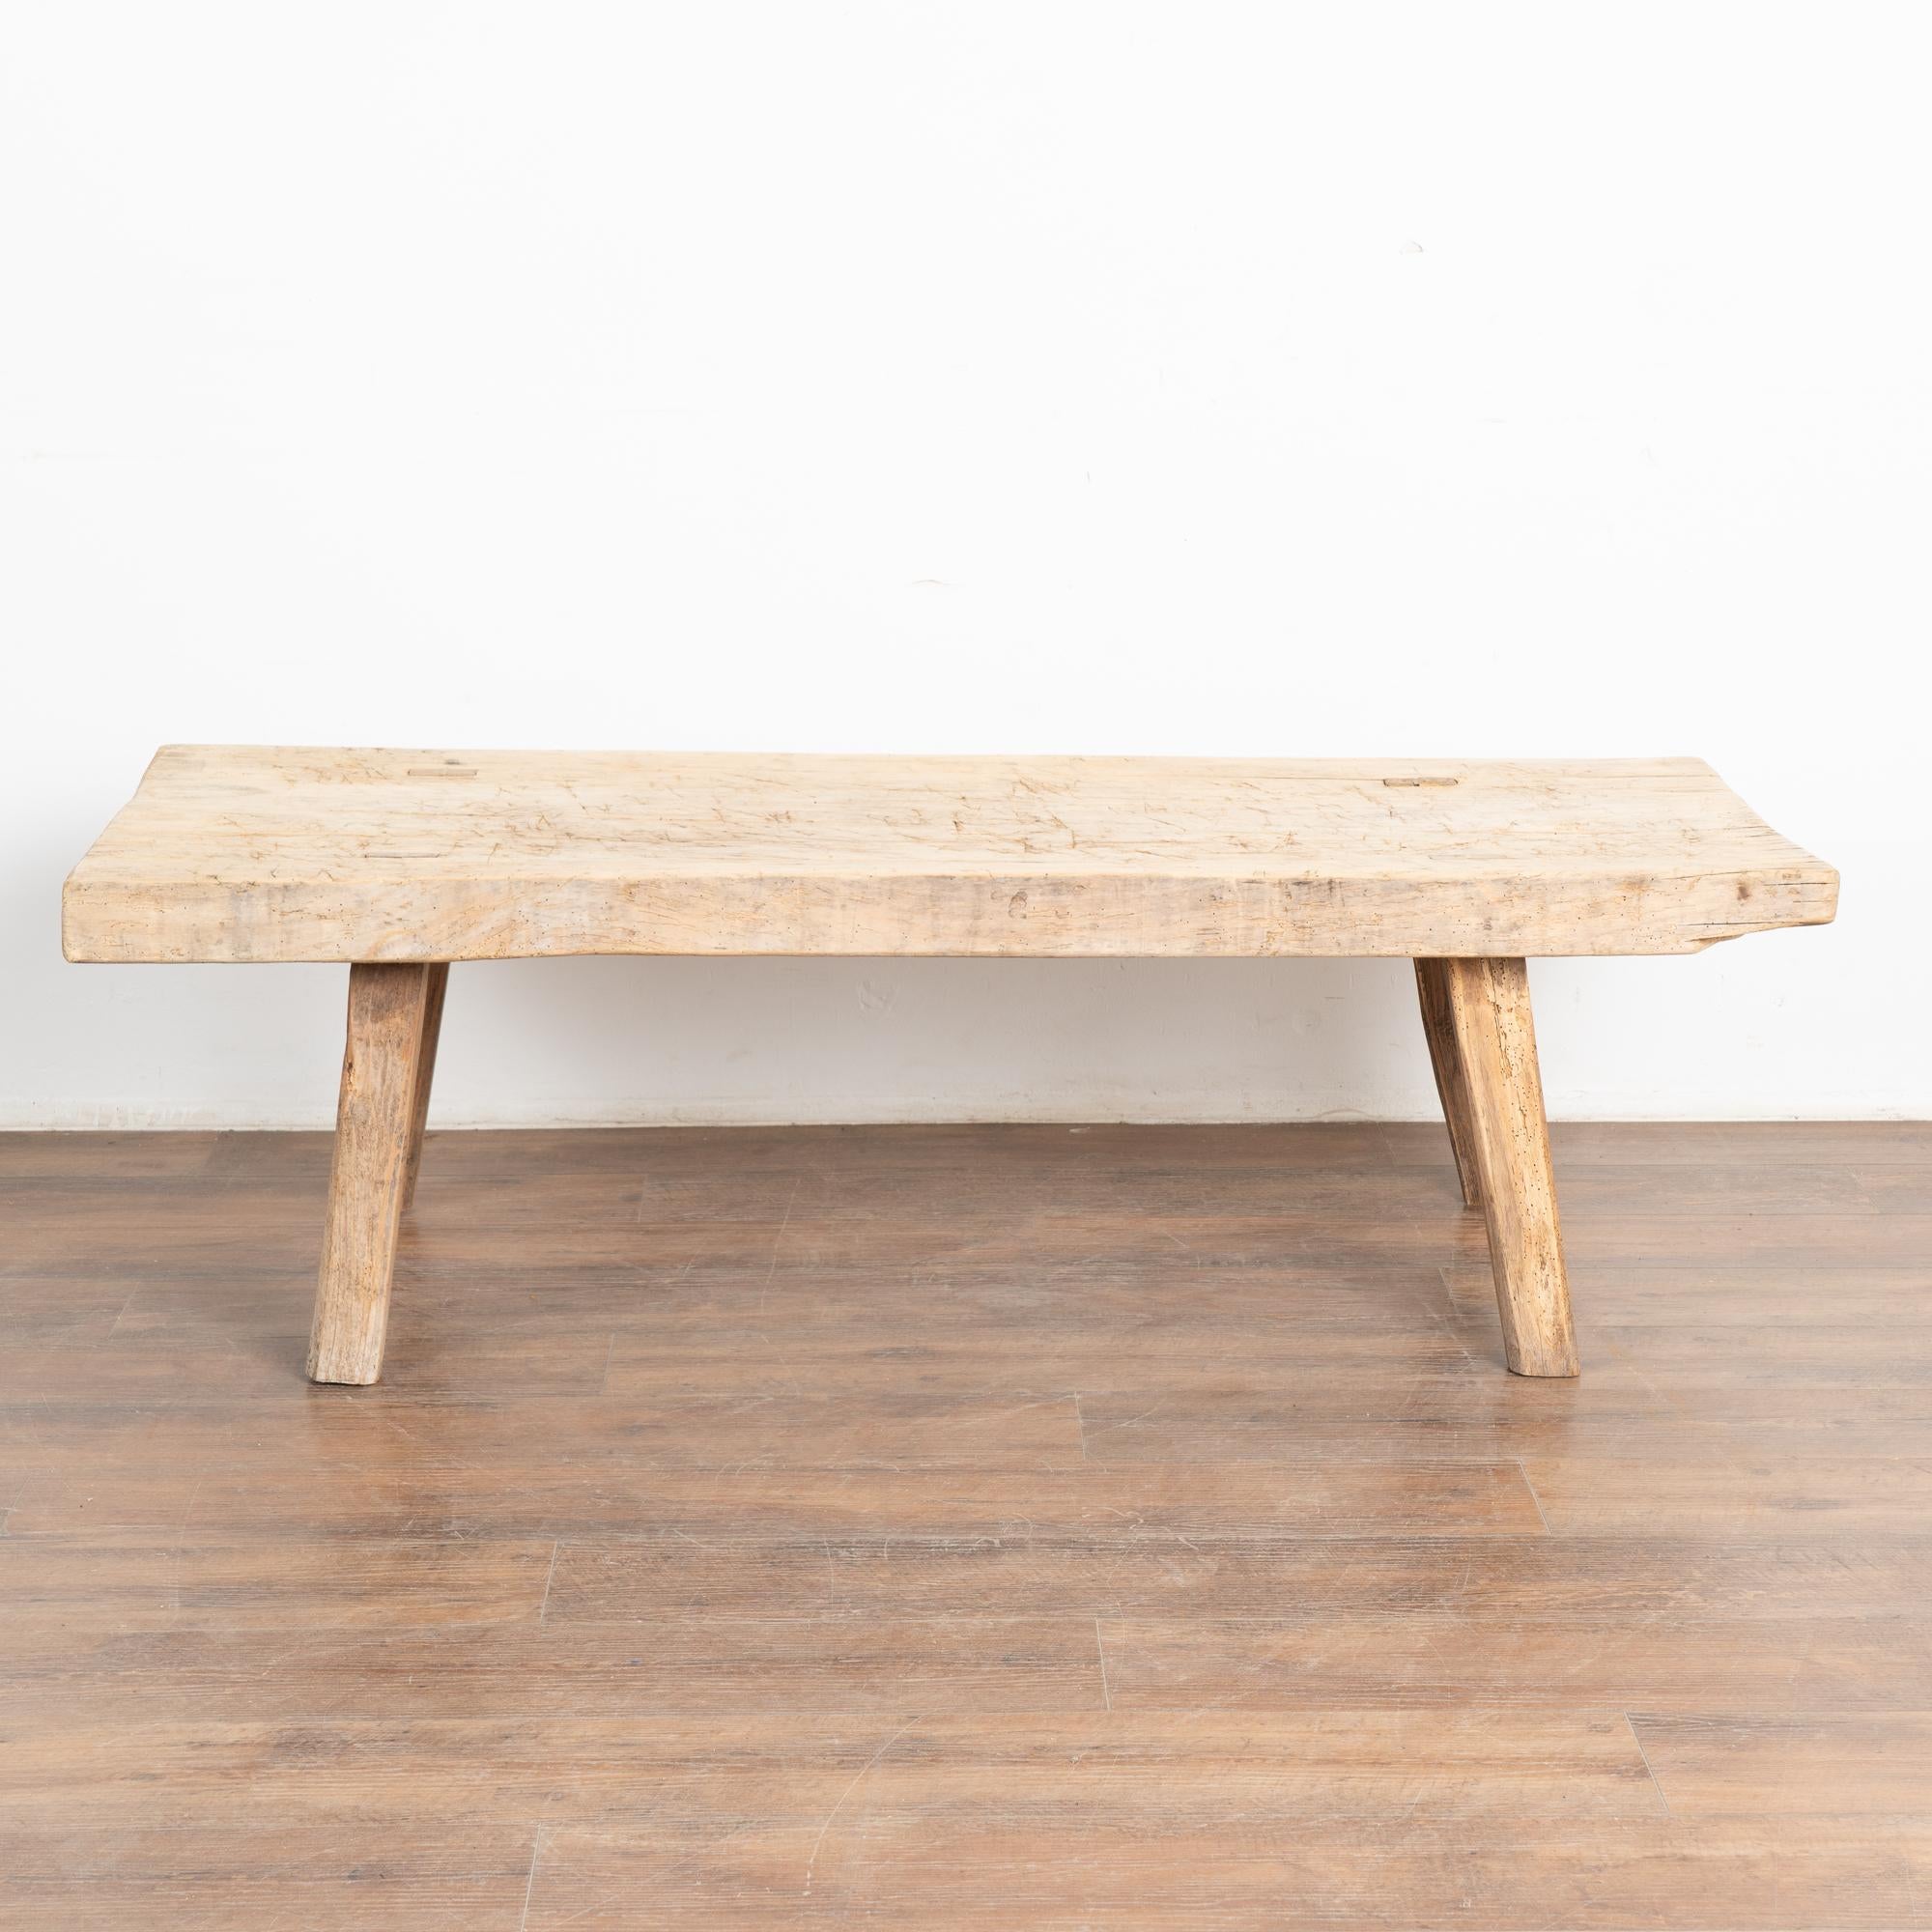 Rustic Plank Top Peg Leg Coffee Table, Hungary circa 1900 In Good Condition For Sale In Round Top, TX